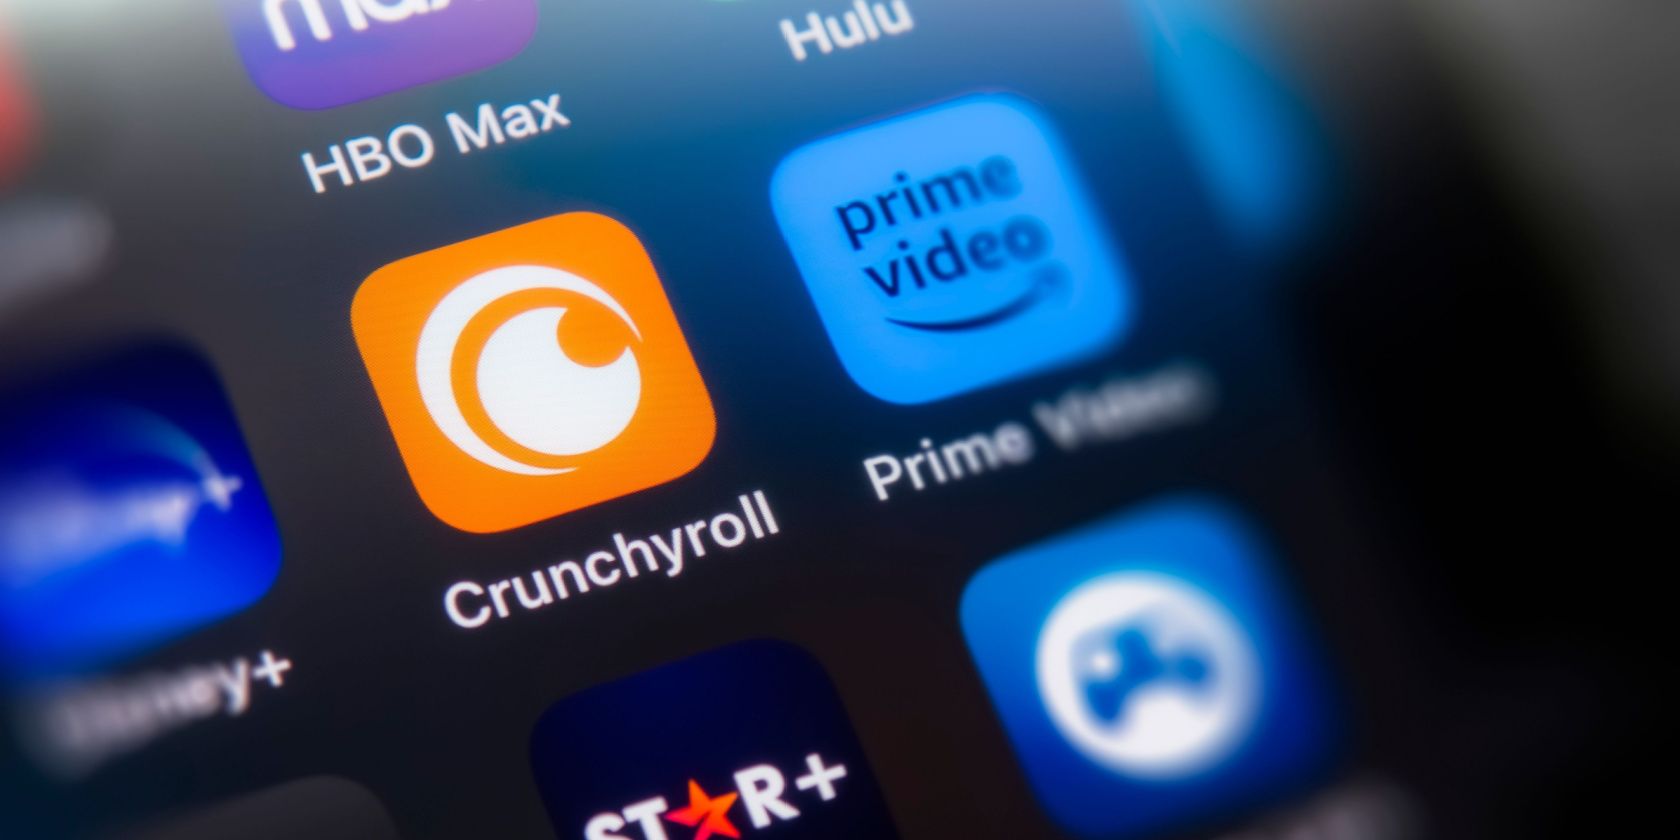 The Crunchyroll logo on a phone surrounded by other streaming apps